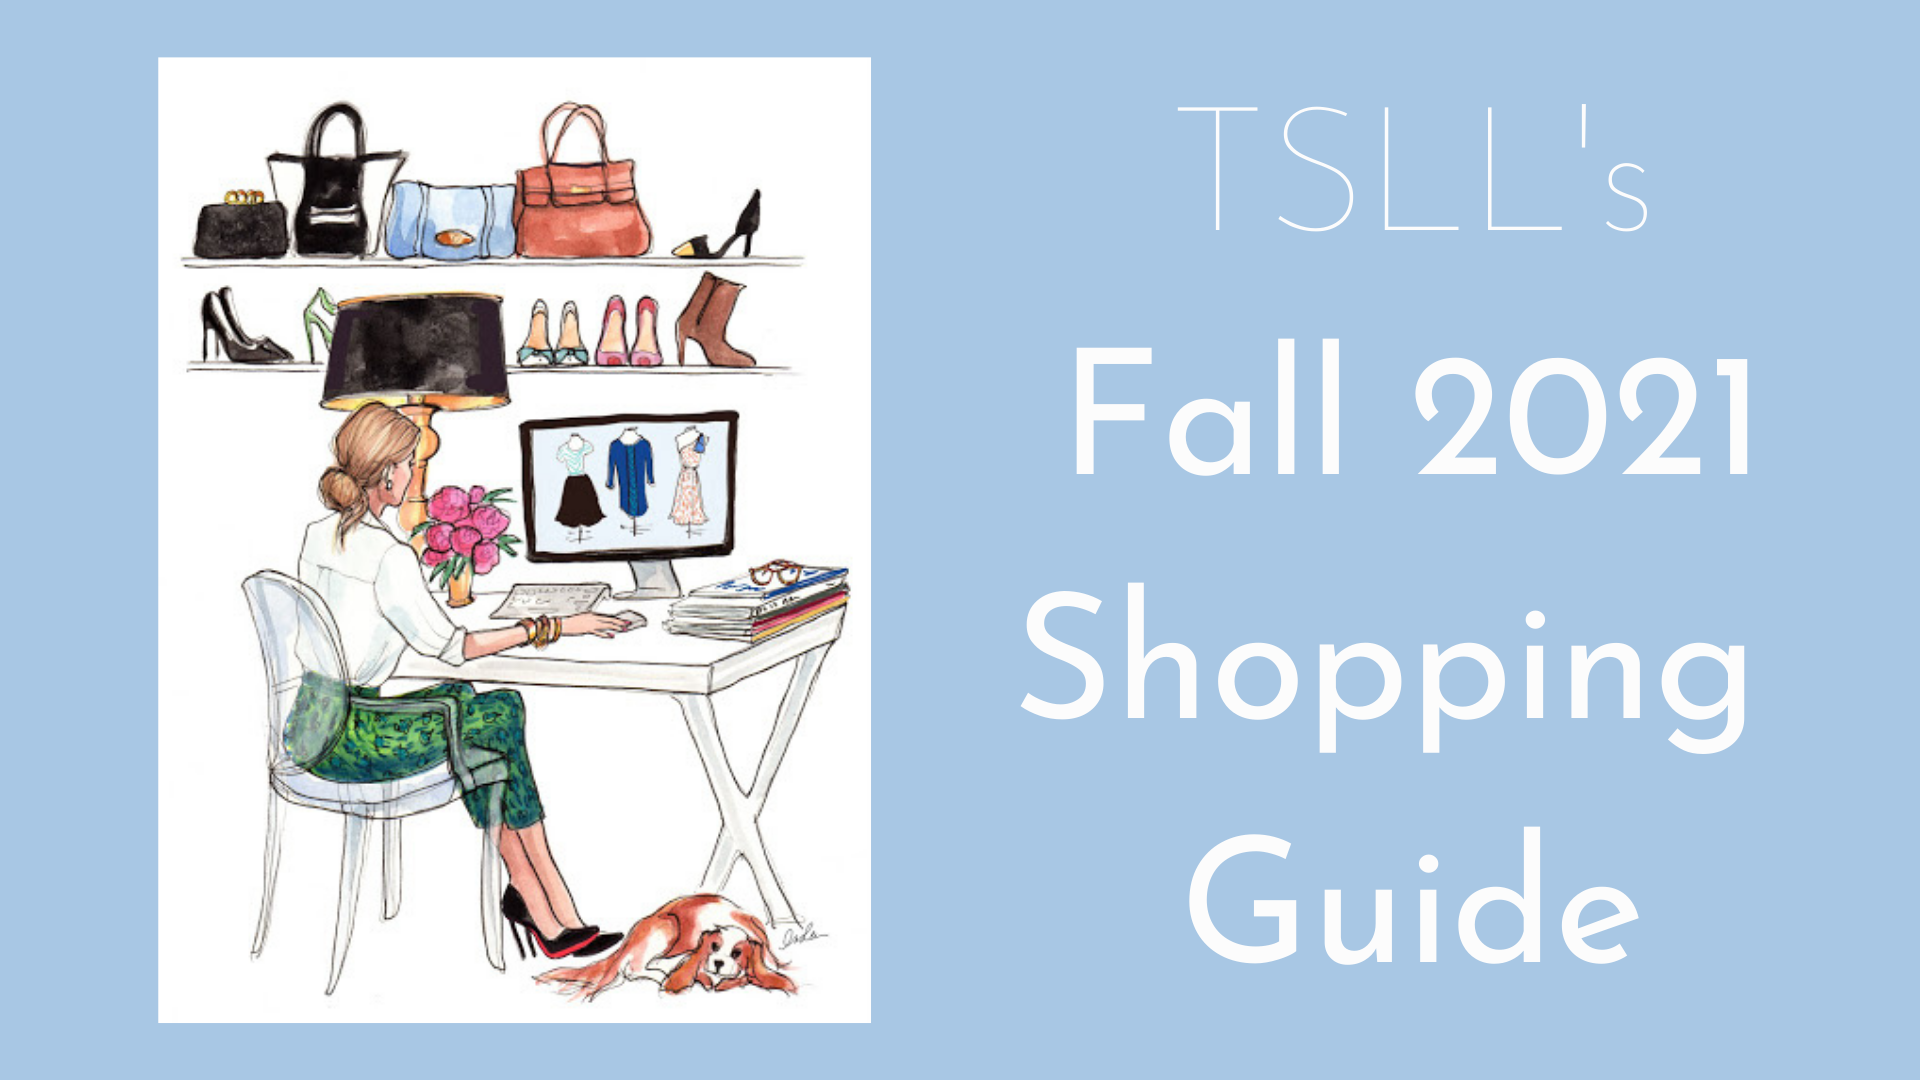 TSLL’s Fall 2021 Shopping Guide and 70+ hand-picked Capsule Items